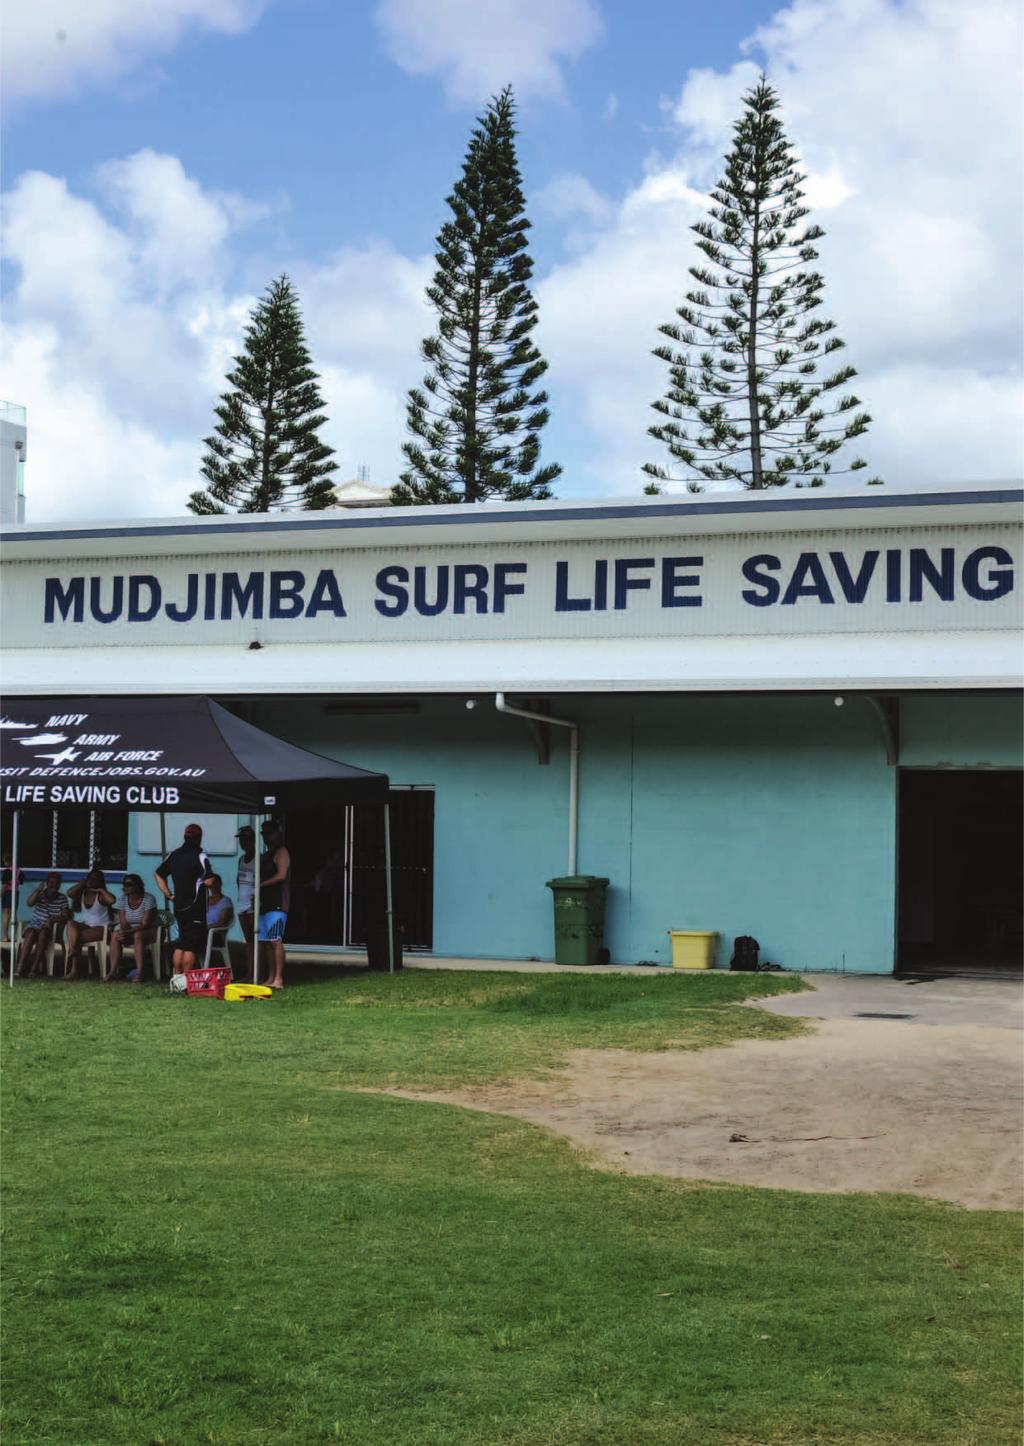 24 pt OUR CLUB MISSION Throughout Australia, Surf Life Saving State Centres, Branches and Clubs have their own Mission Statement and/or Motto however they all strictly fall under the National SLSA